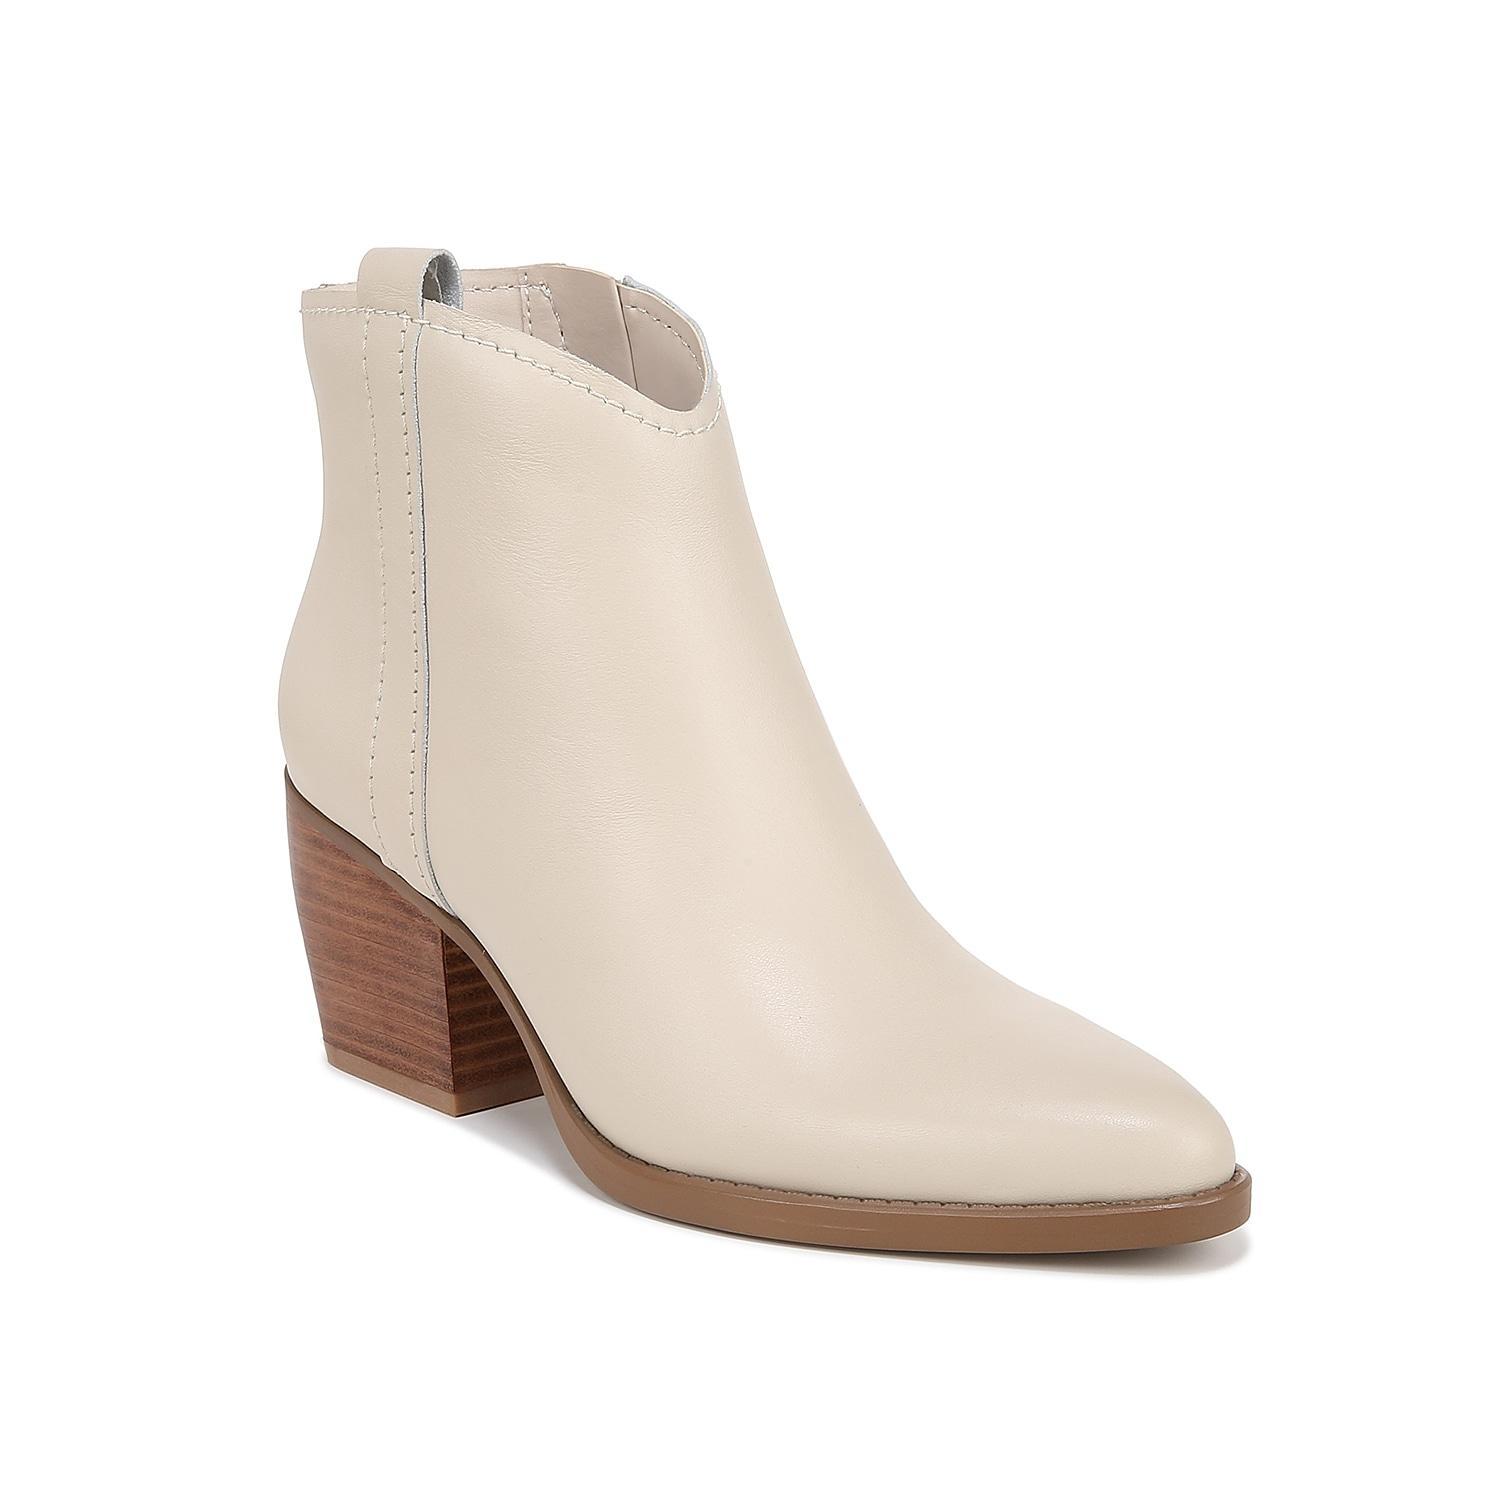 Naturalizer Fairmont Western Booties Product Image